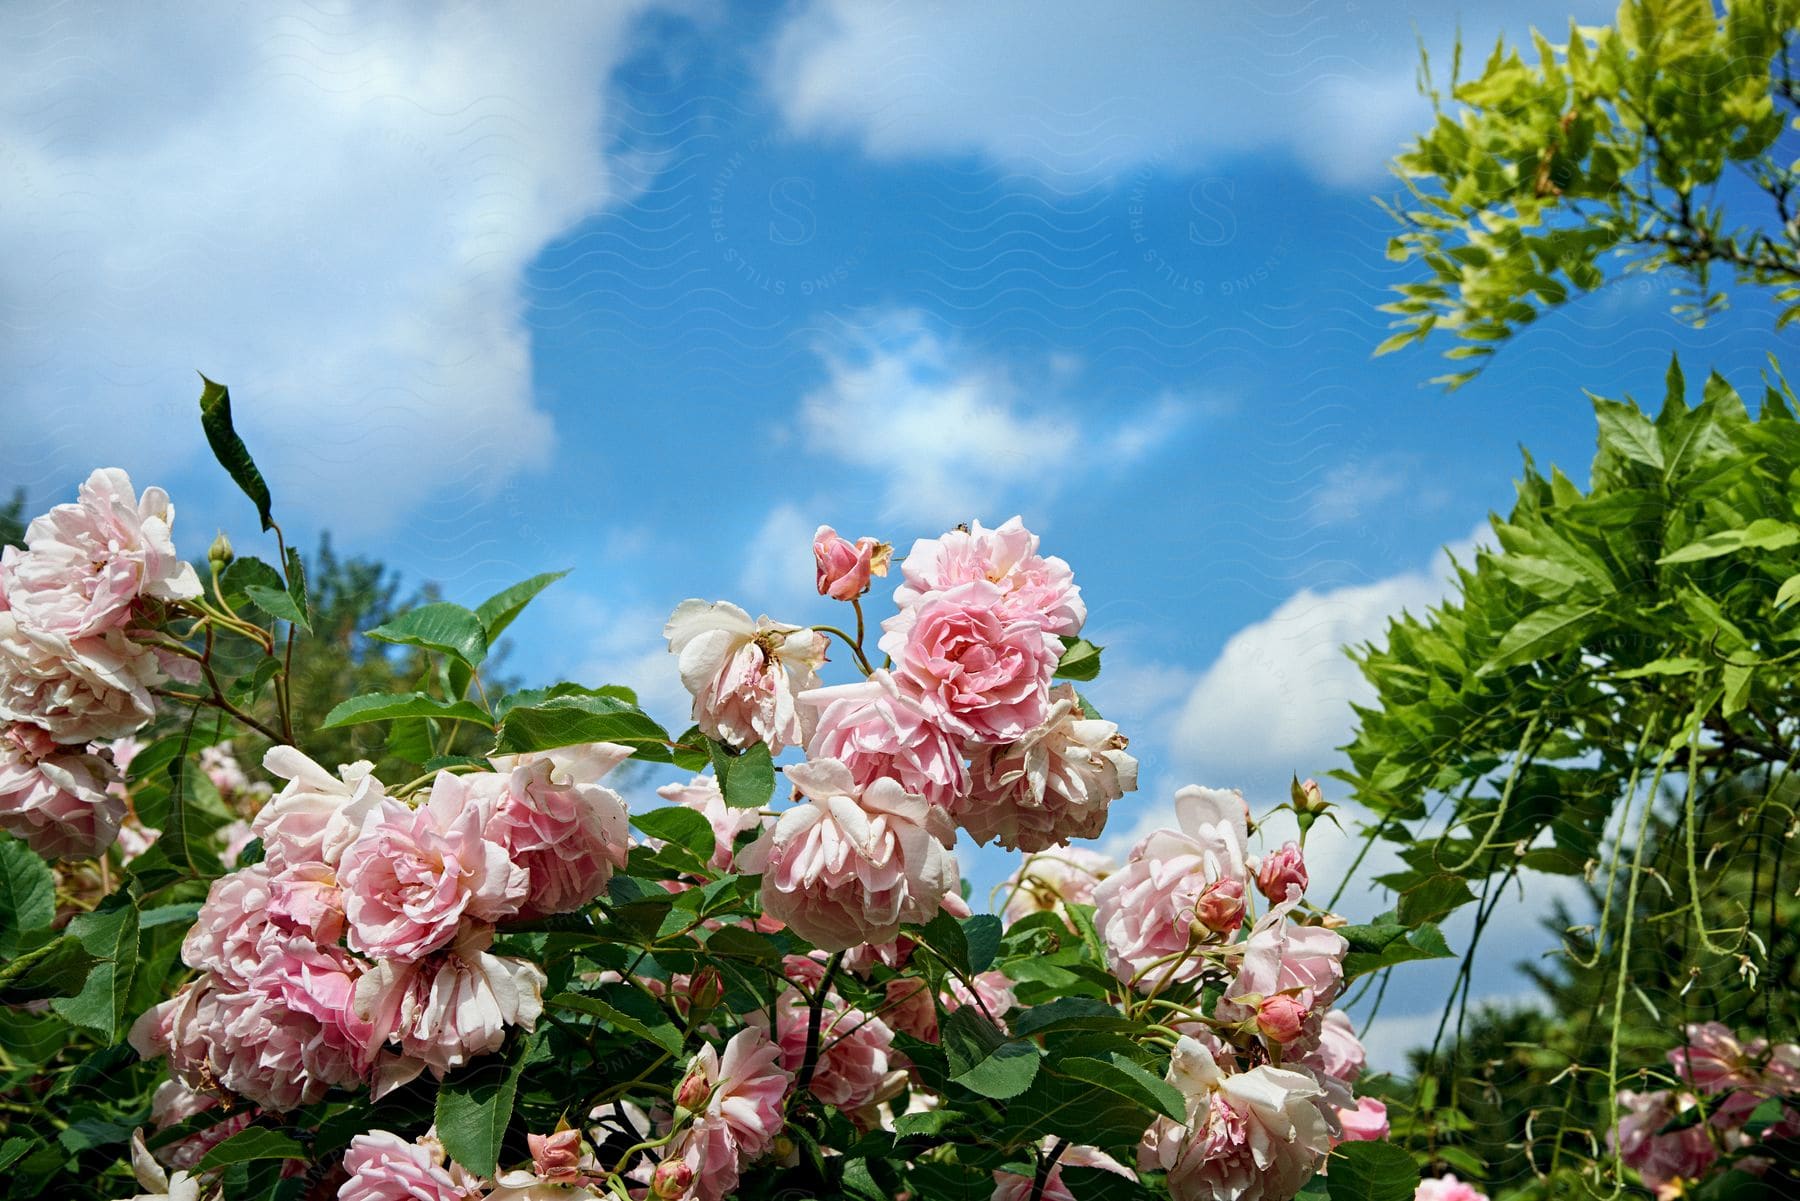 A garden of pink roses blooming under a cloudy sky